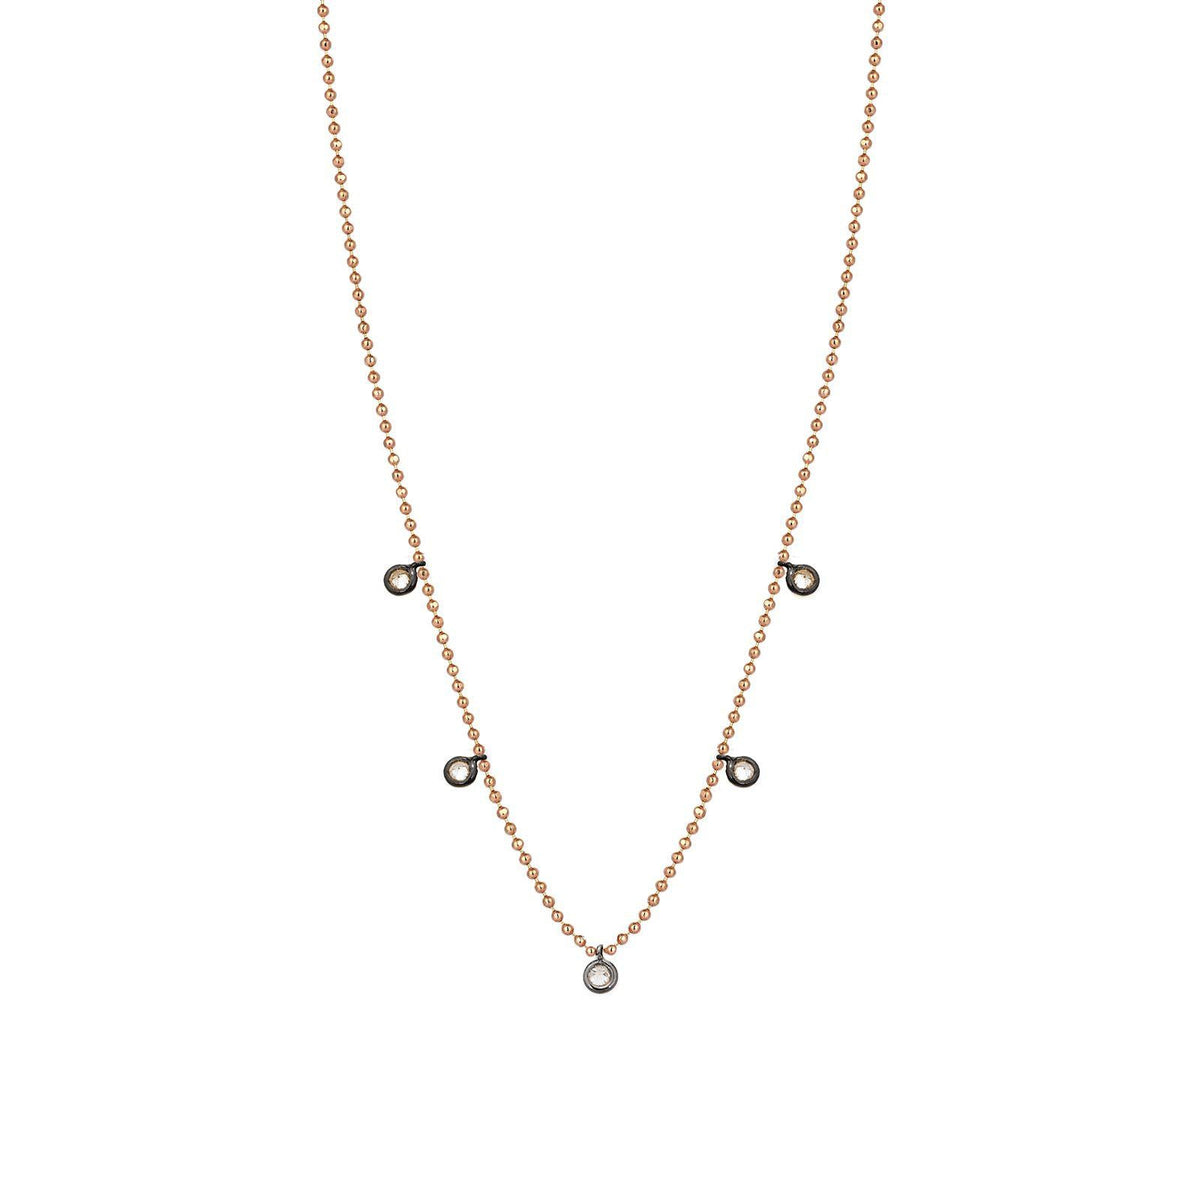 5 Solitaires Necklace